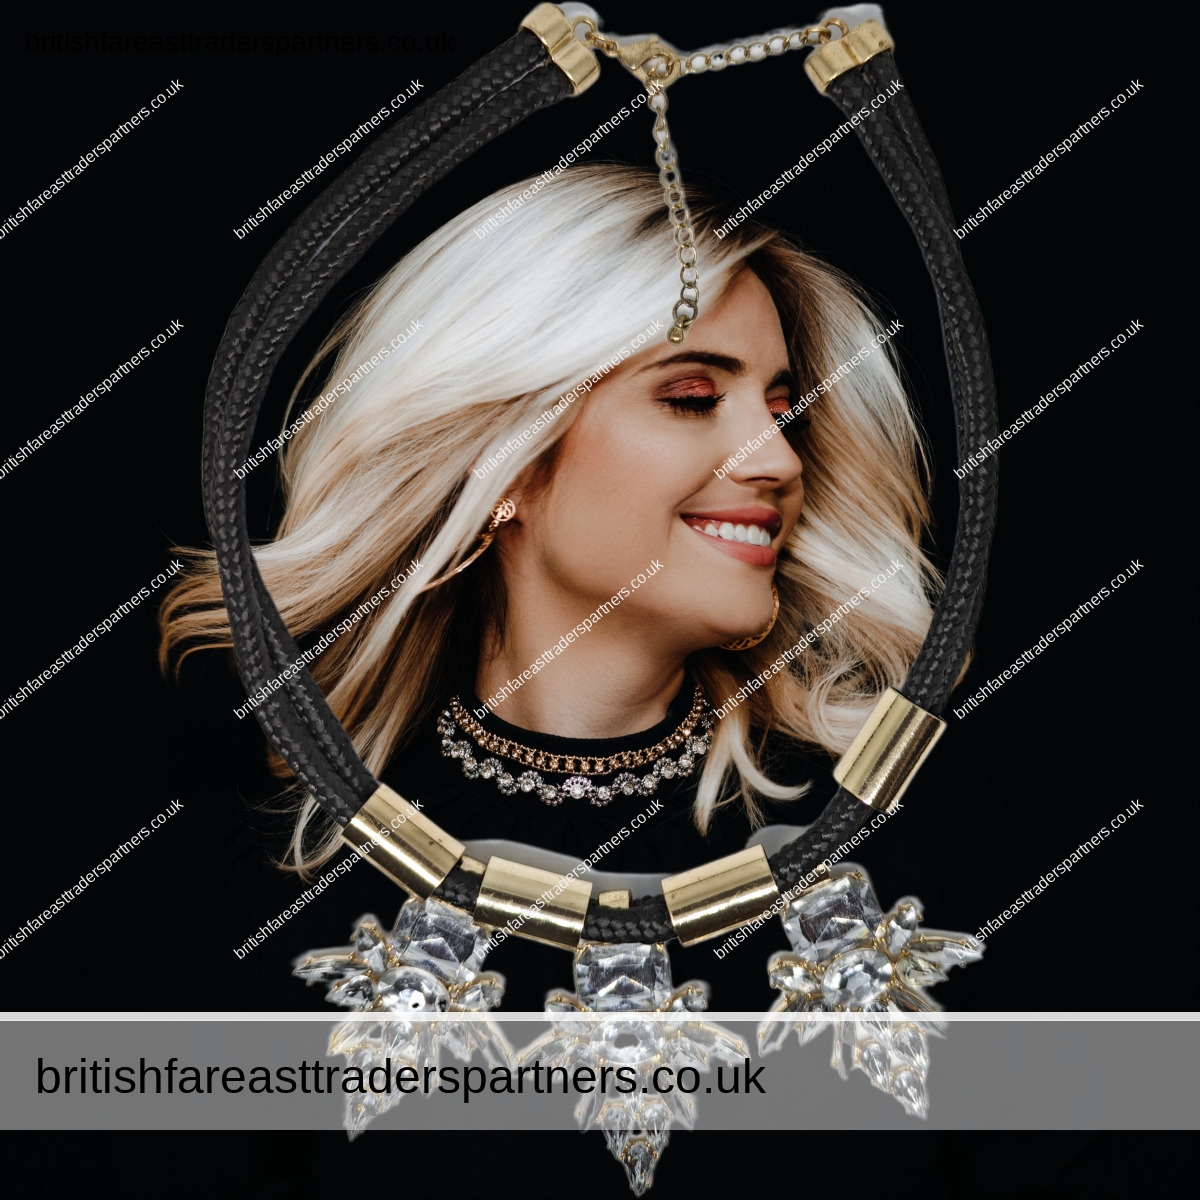 BLACK & GOLD ROPE & GEMS PARTY NECKLACE ICICLE ICE ICE BABY PENDANTS STATEMENT NECKLACE | PARTY JEWELLERY | JEWELLERY | COSTUME JEWELLERY |  | FASHION | LIFESTYLE & CULTURE